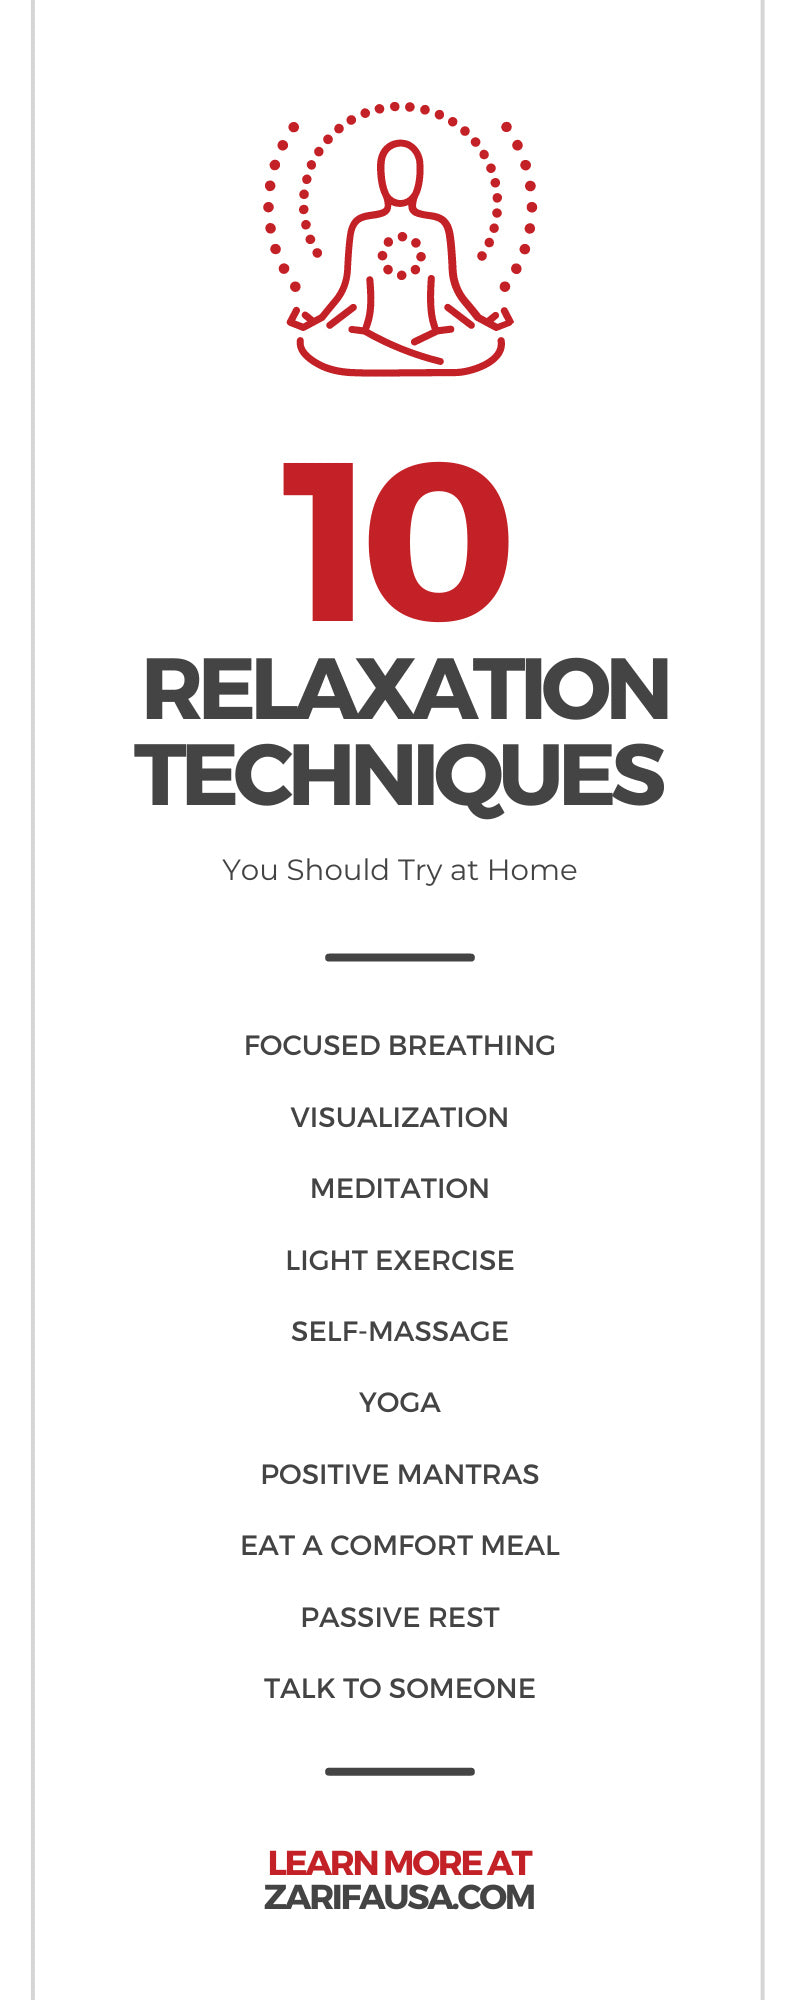 10 Relaxation Techniques You Should Try at Home